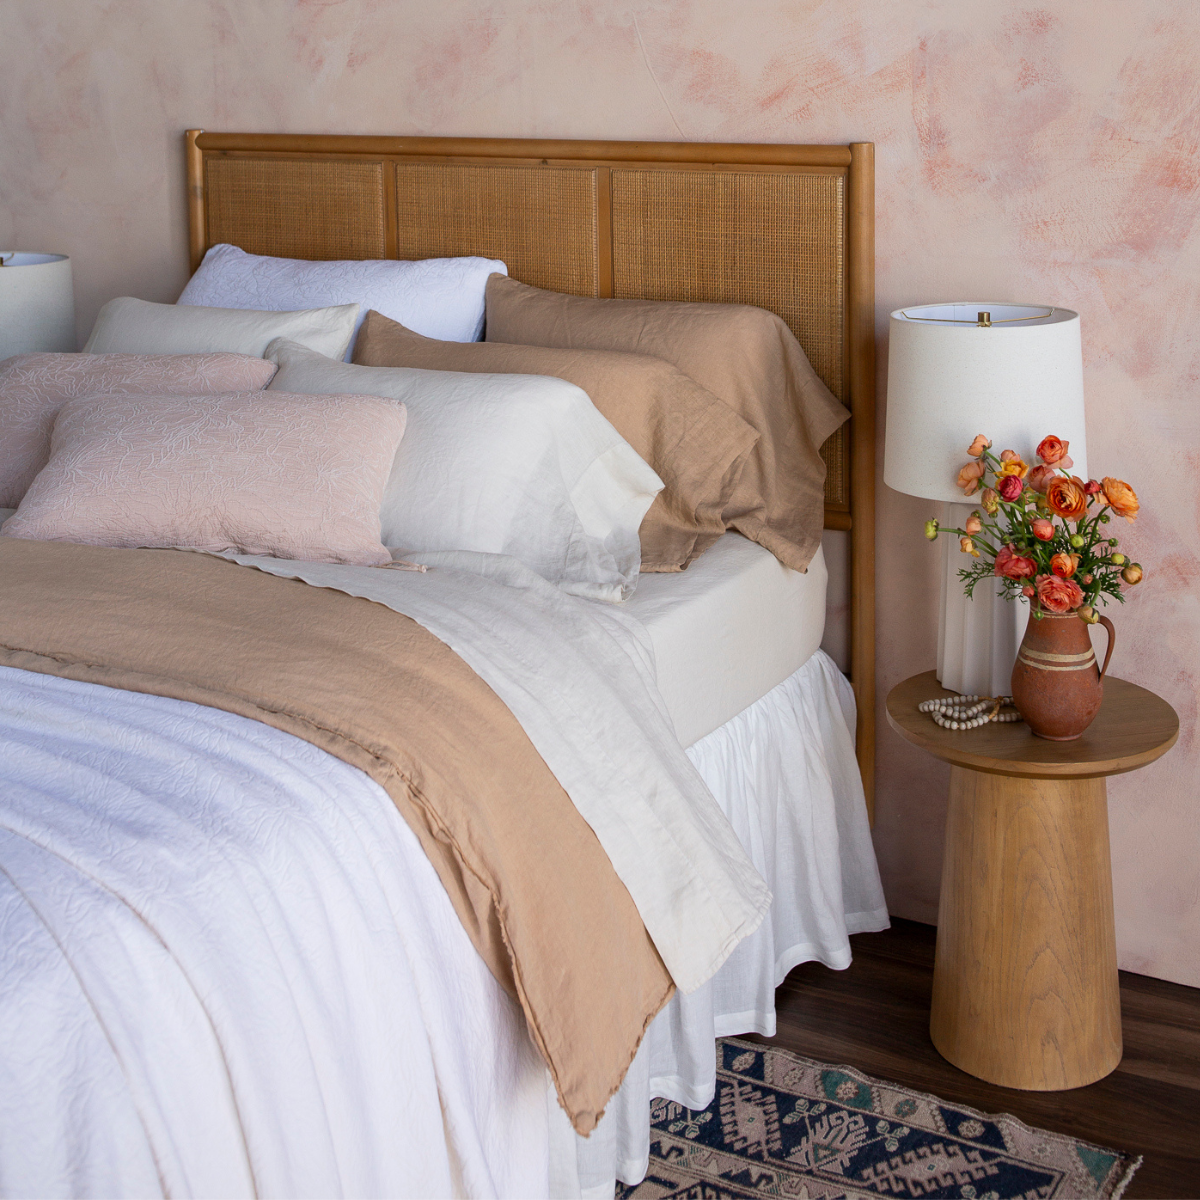 [allvariants]: a three-quarter view of a fully dressed bed in light tones with a rattan headboard against a pink-toned wall. 